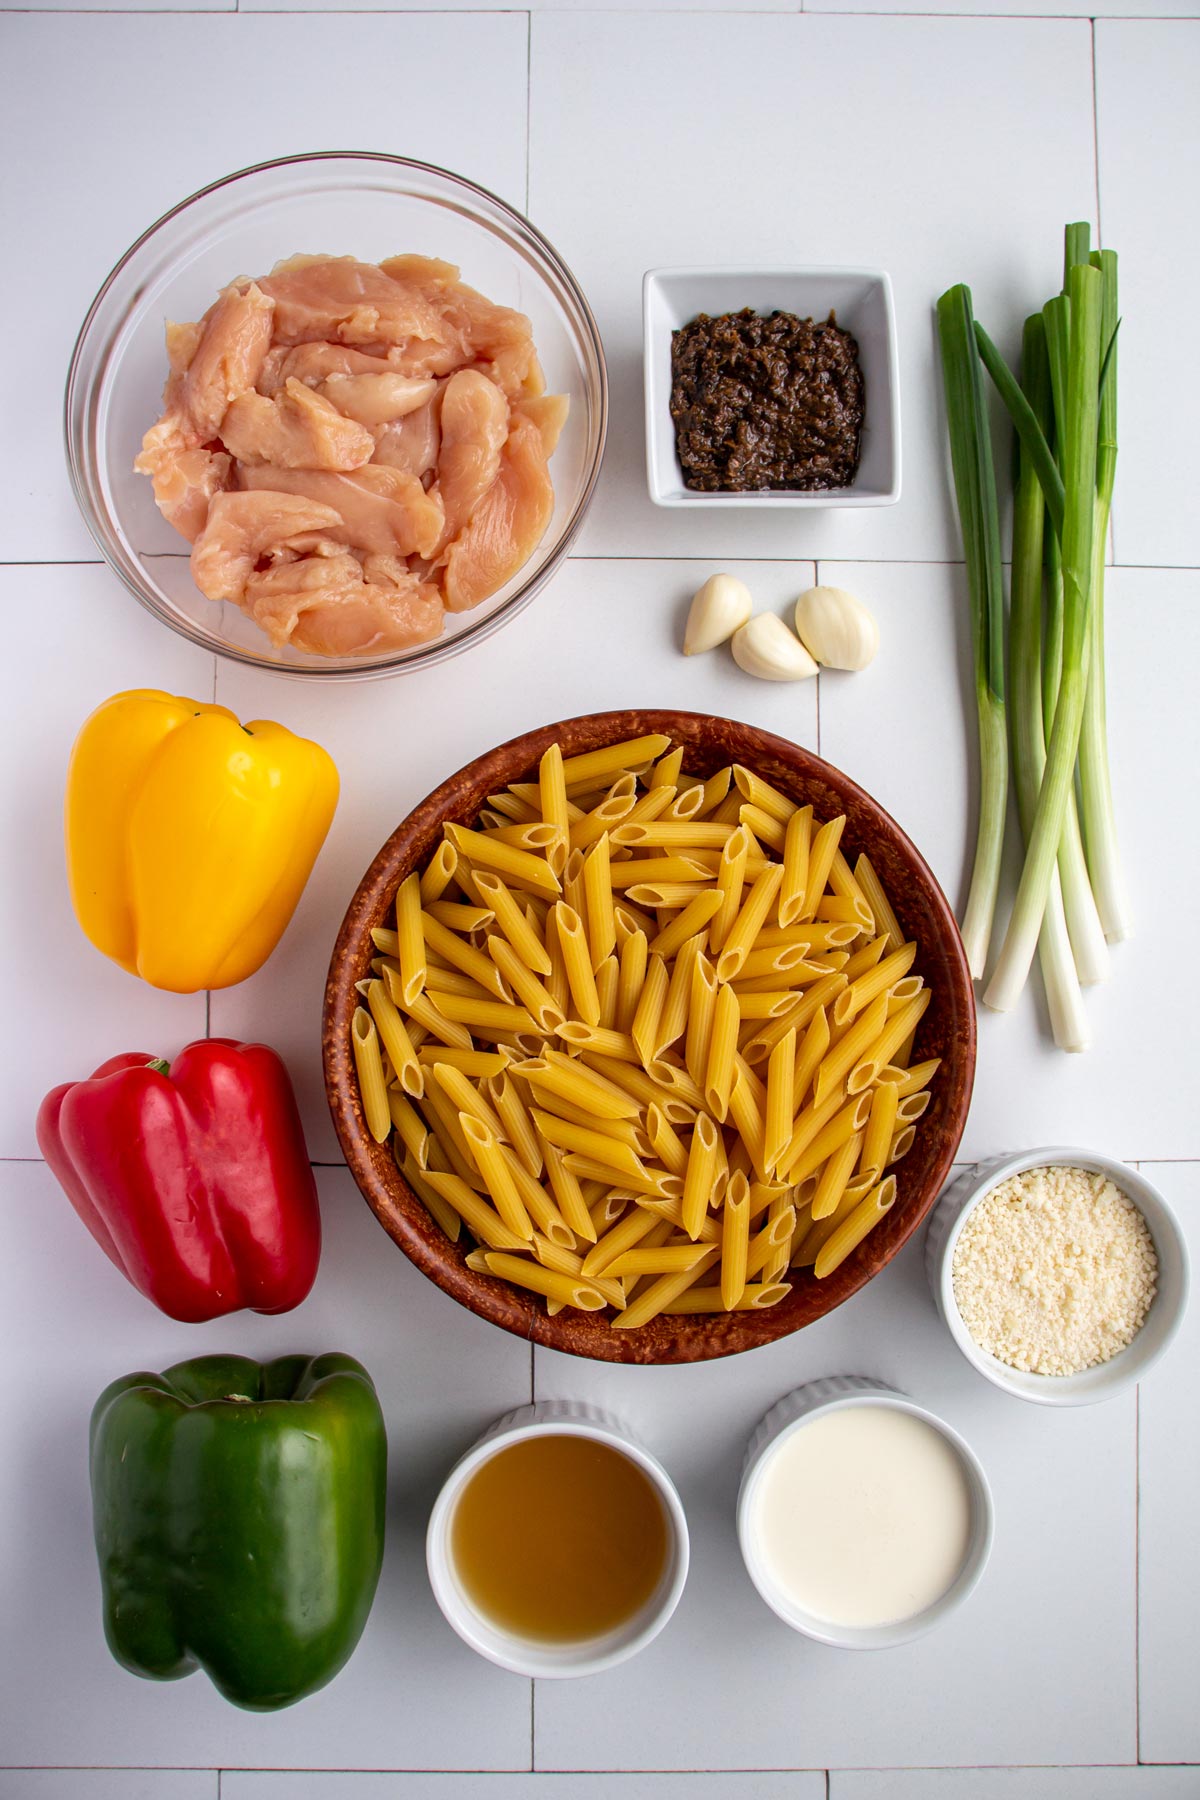 Ingredients for Rasta pasta with jerk chicken on a white tile background.